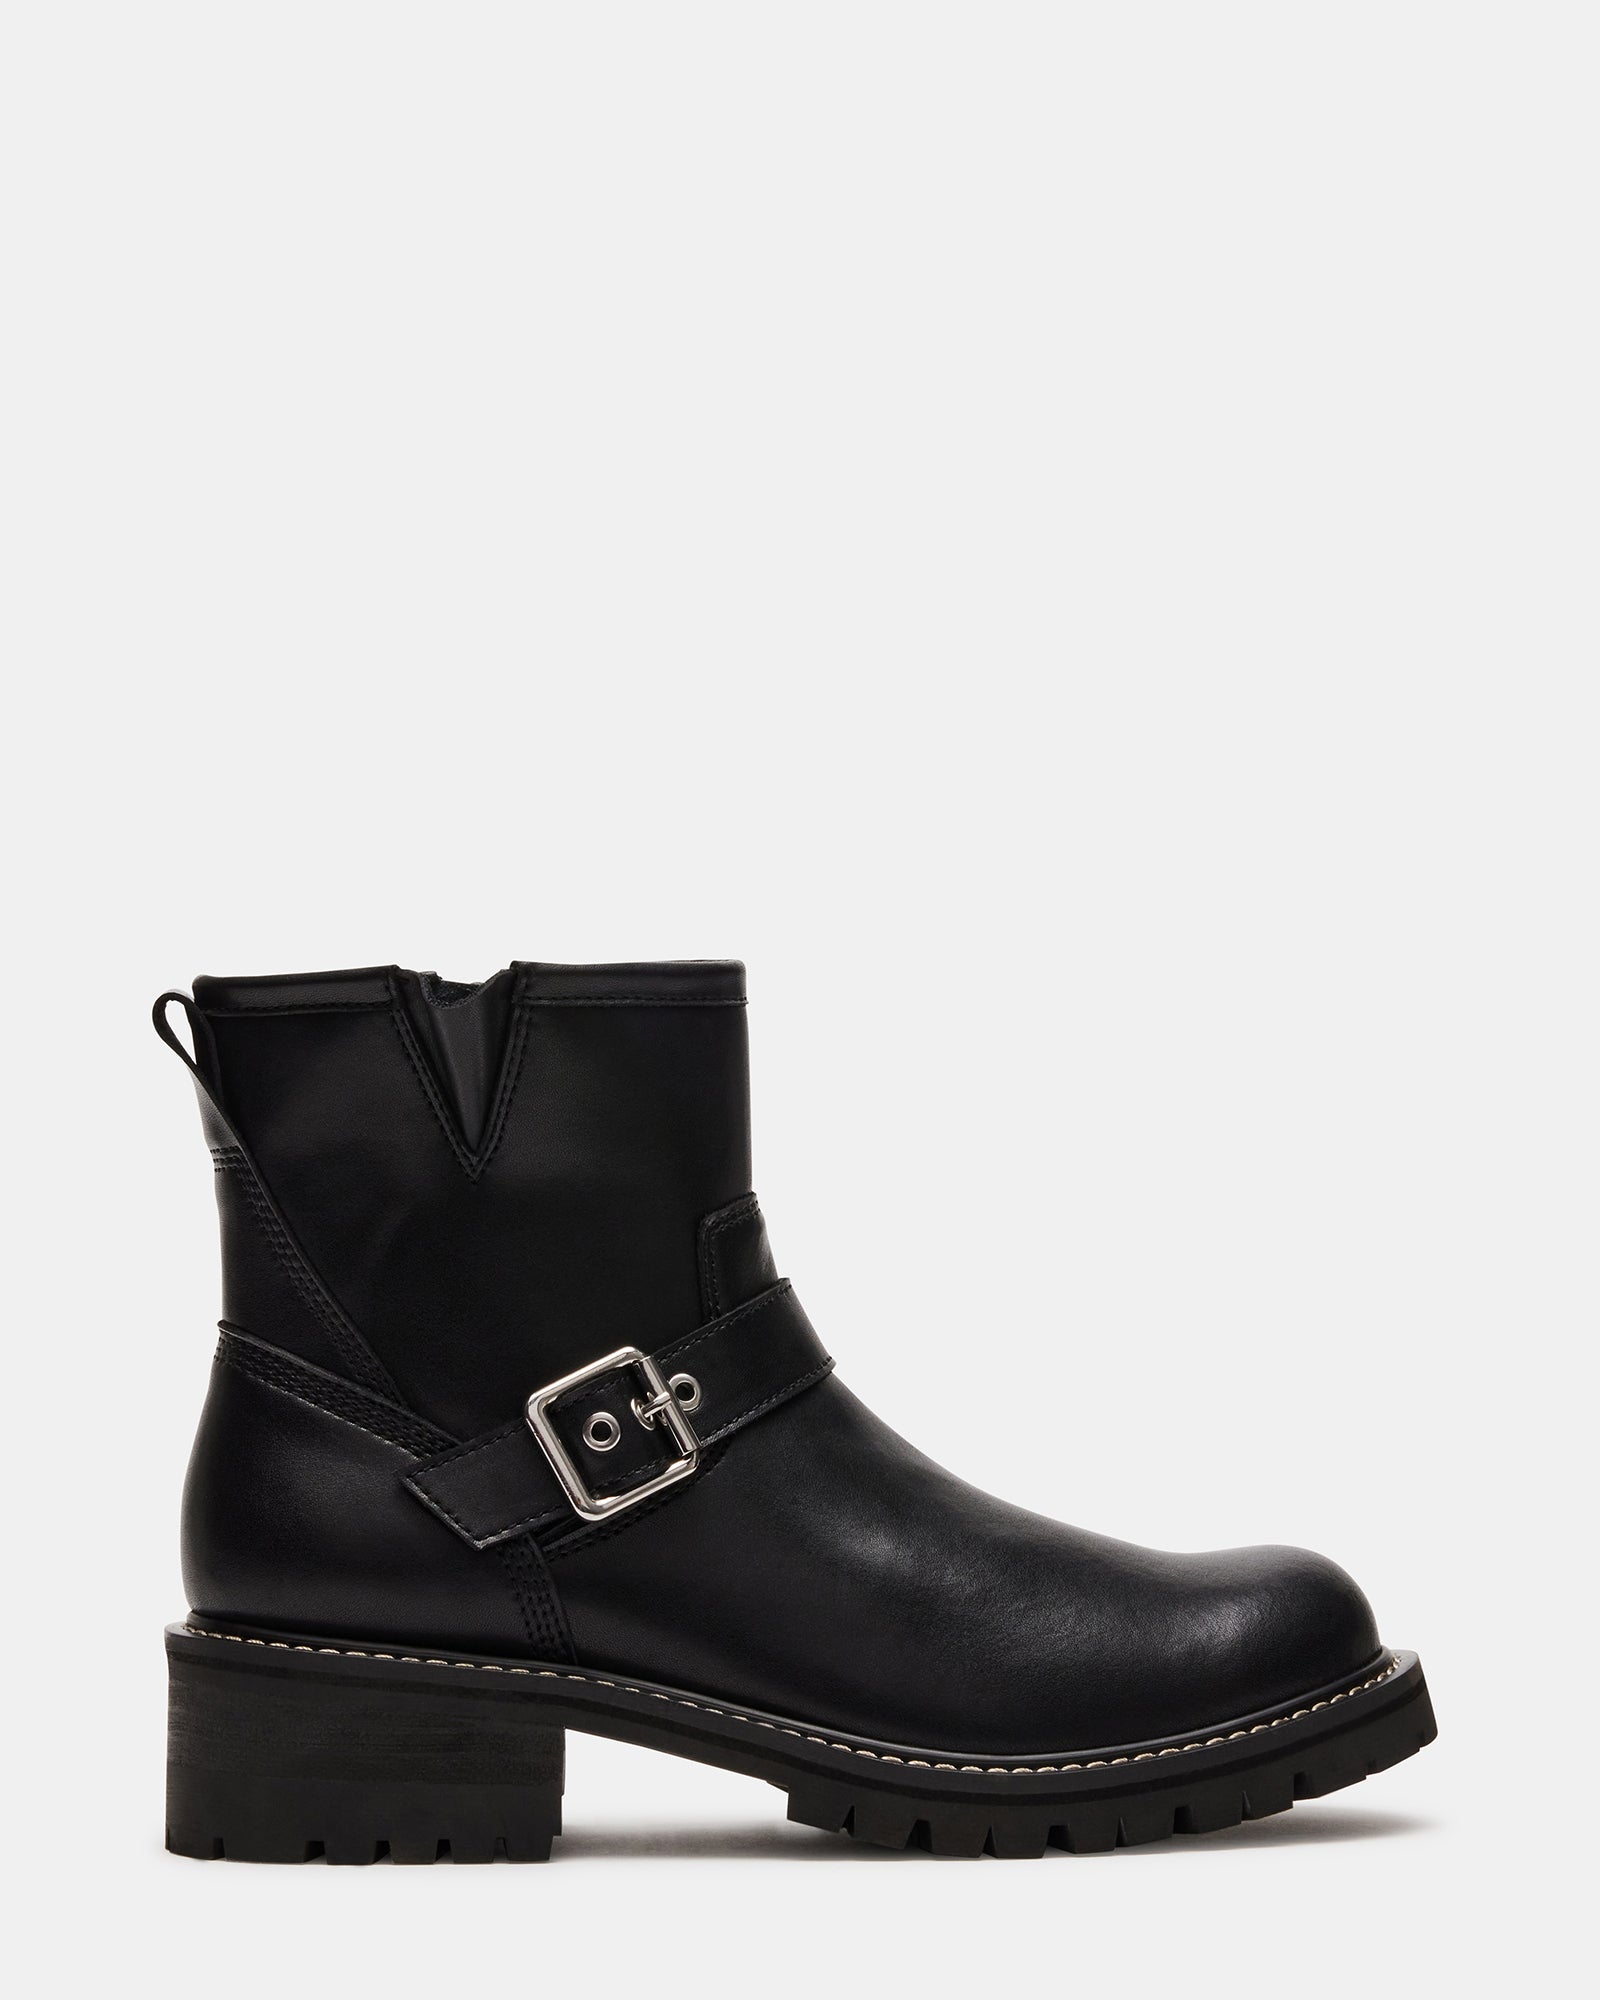 DONOVAN Black Leather Lug Sole Ankle Boot